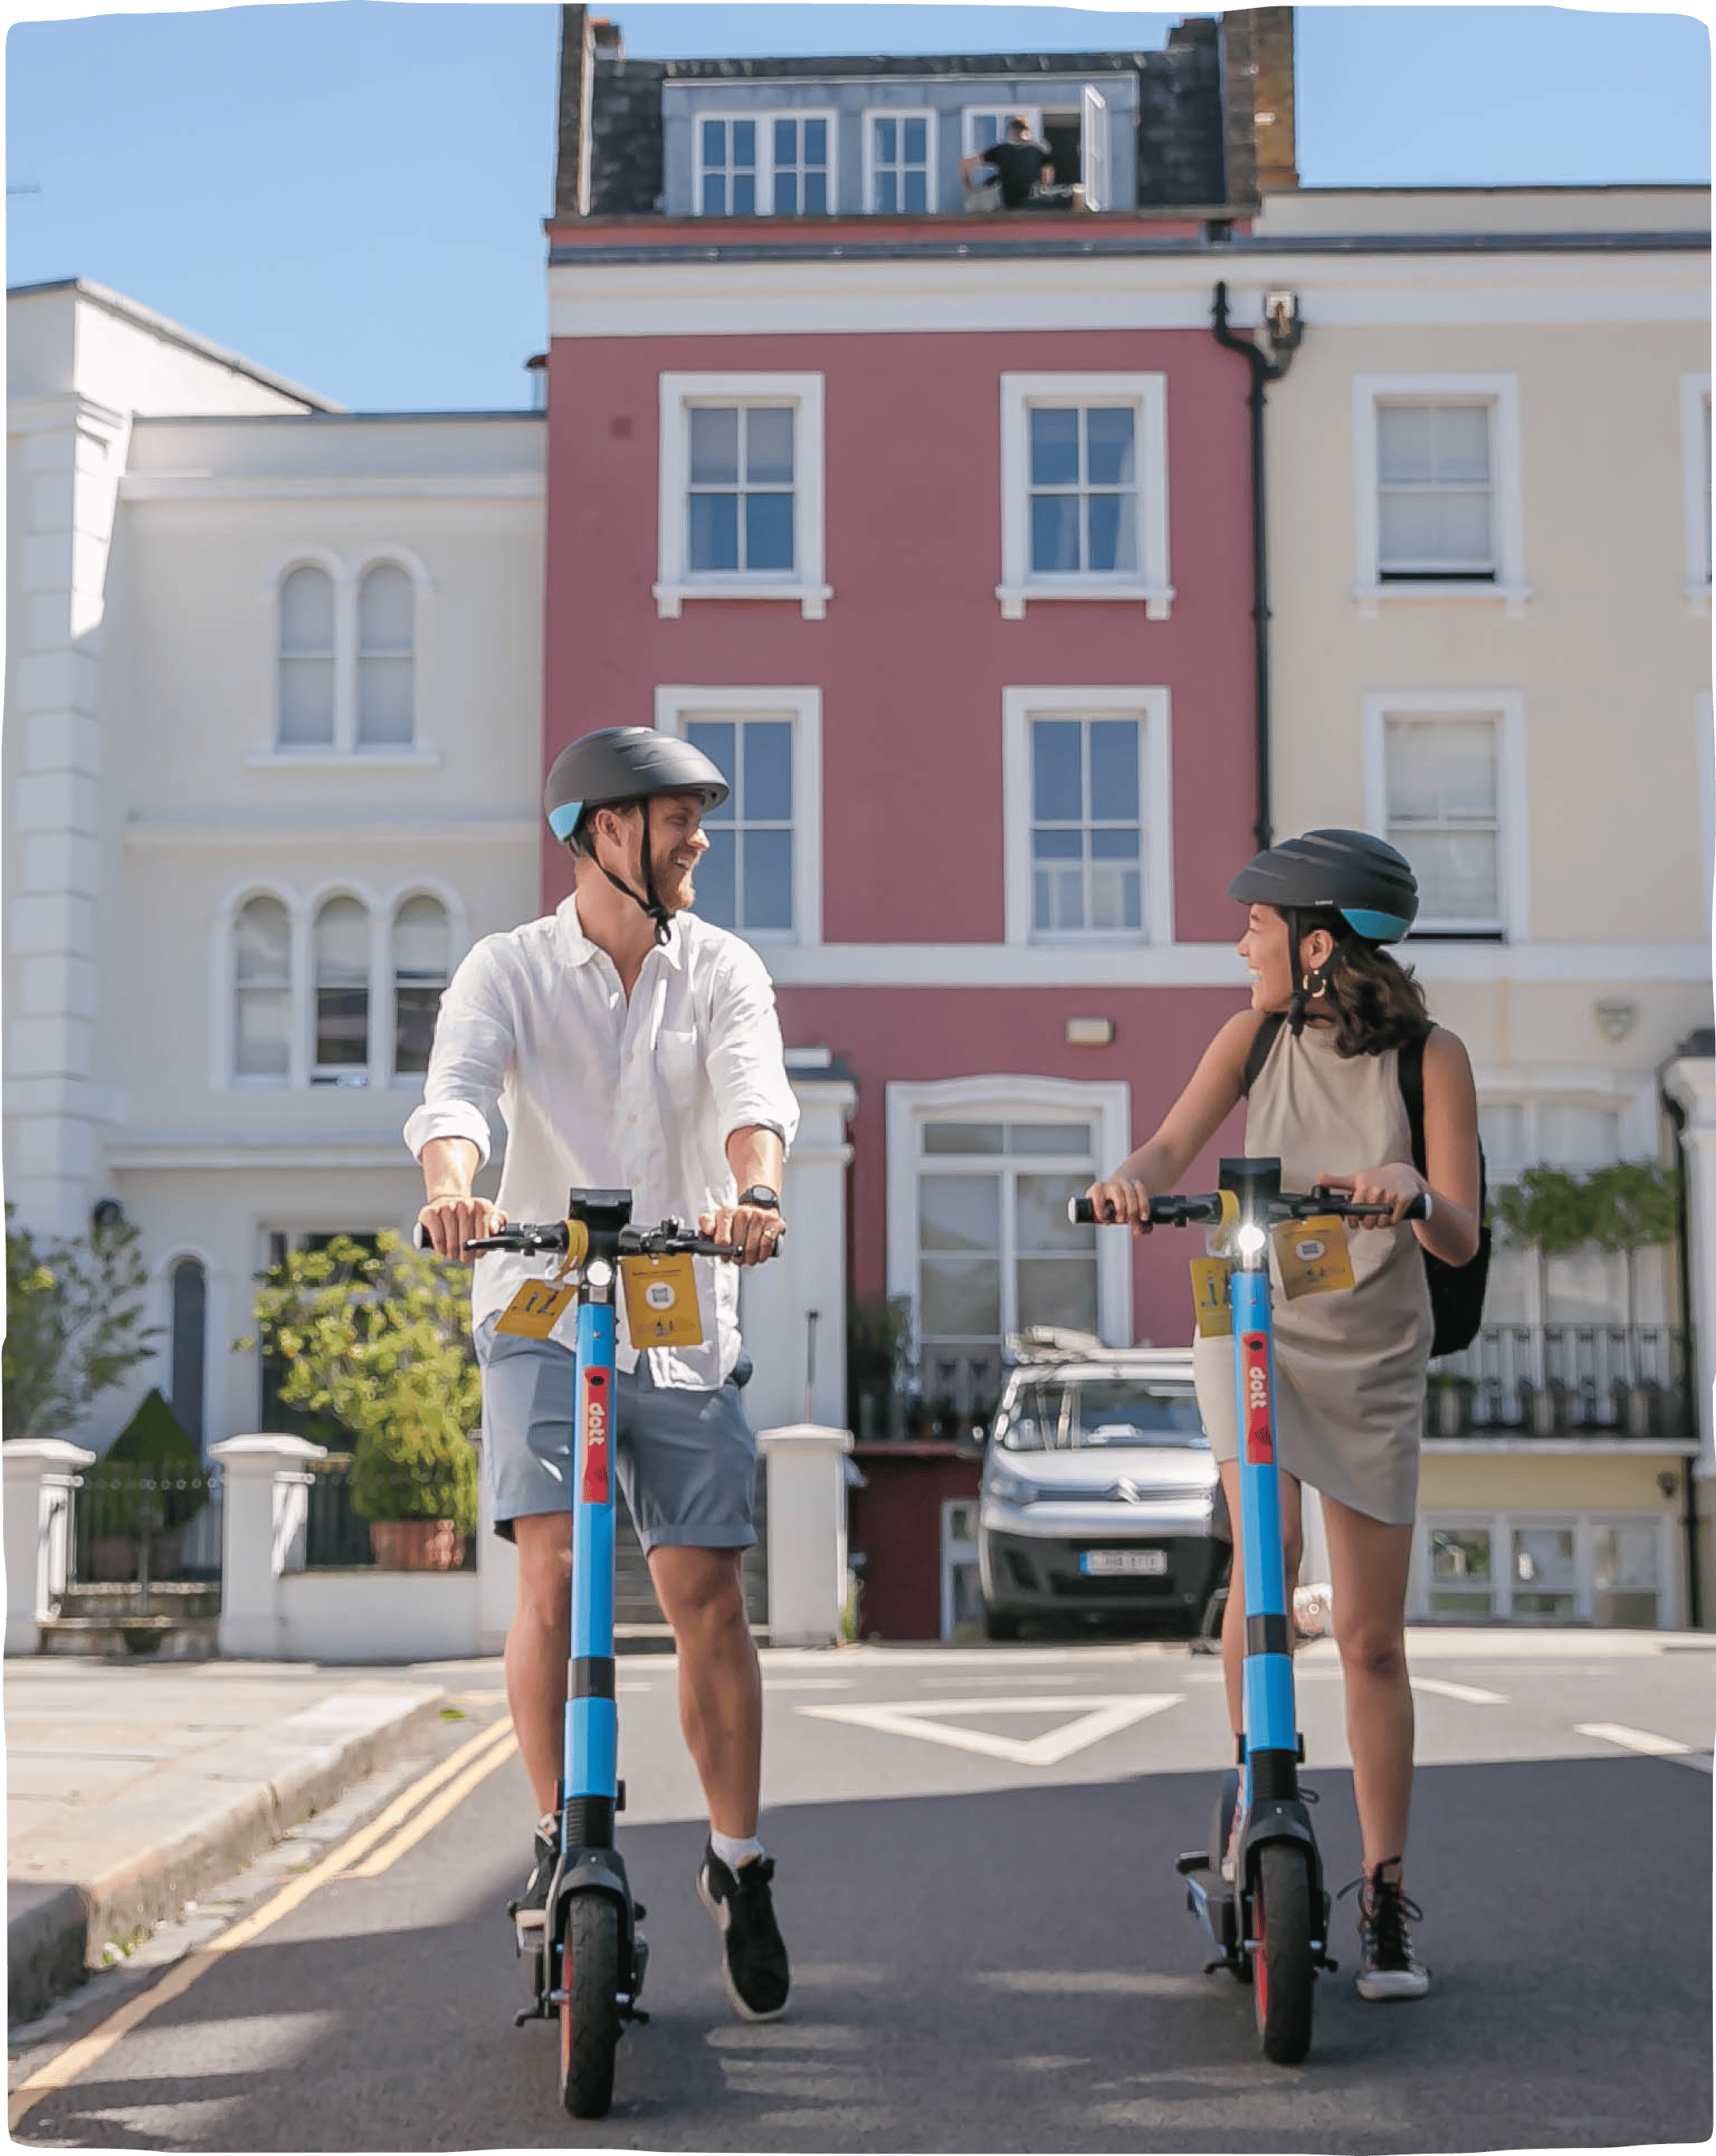 A man and a woman wearing helmets and smiling at each other while riding down a sunny street, with row houses in the background.